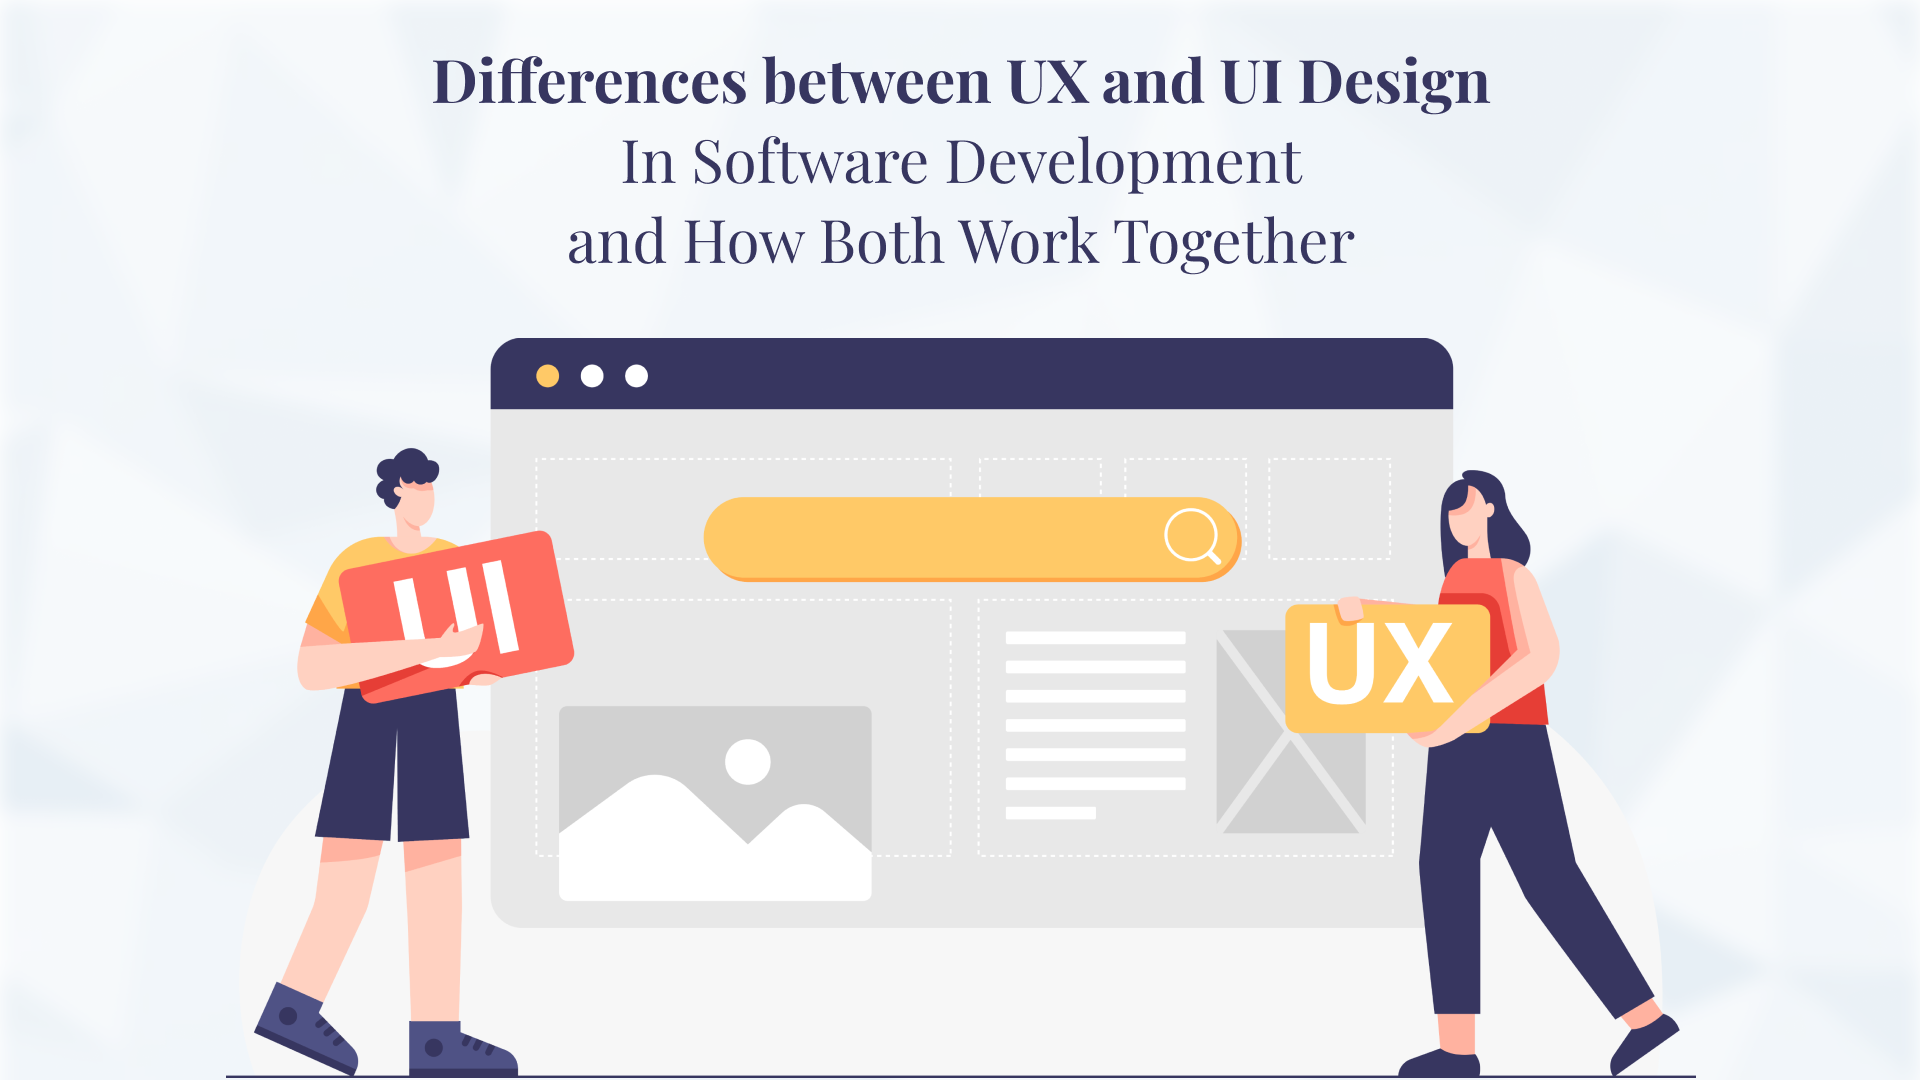 Differences between UI and UX Design in software development